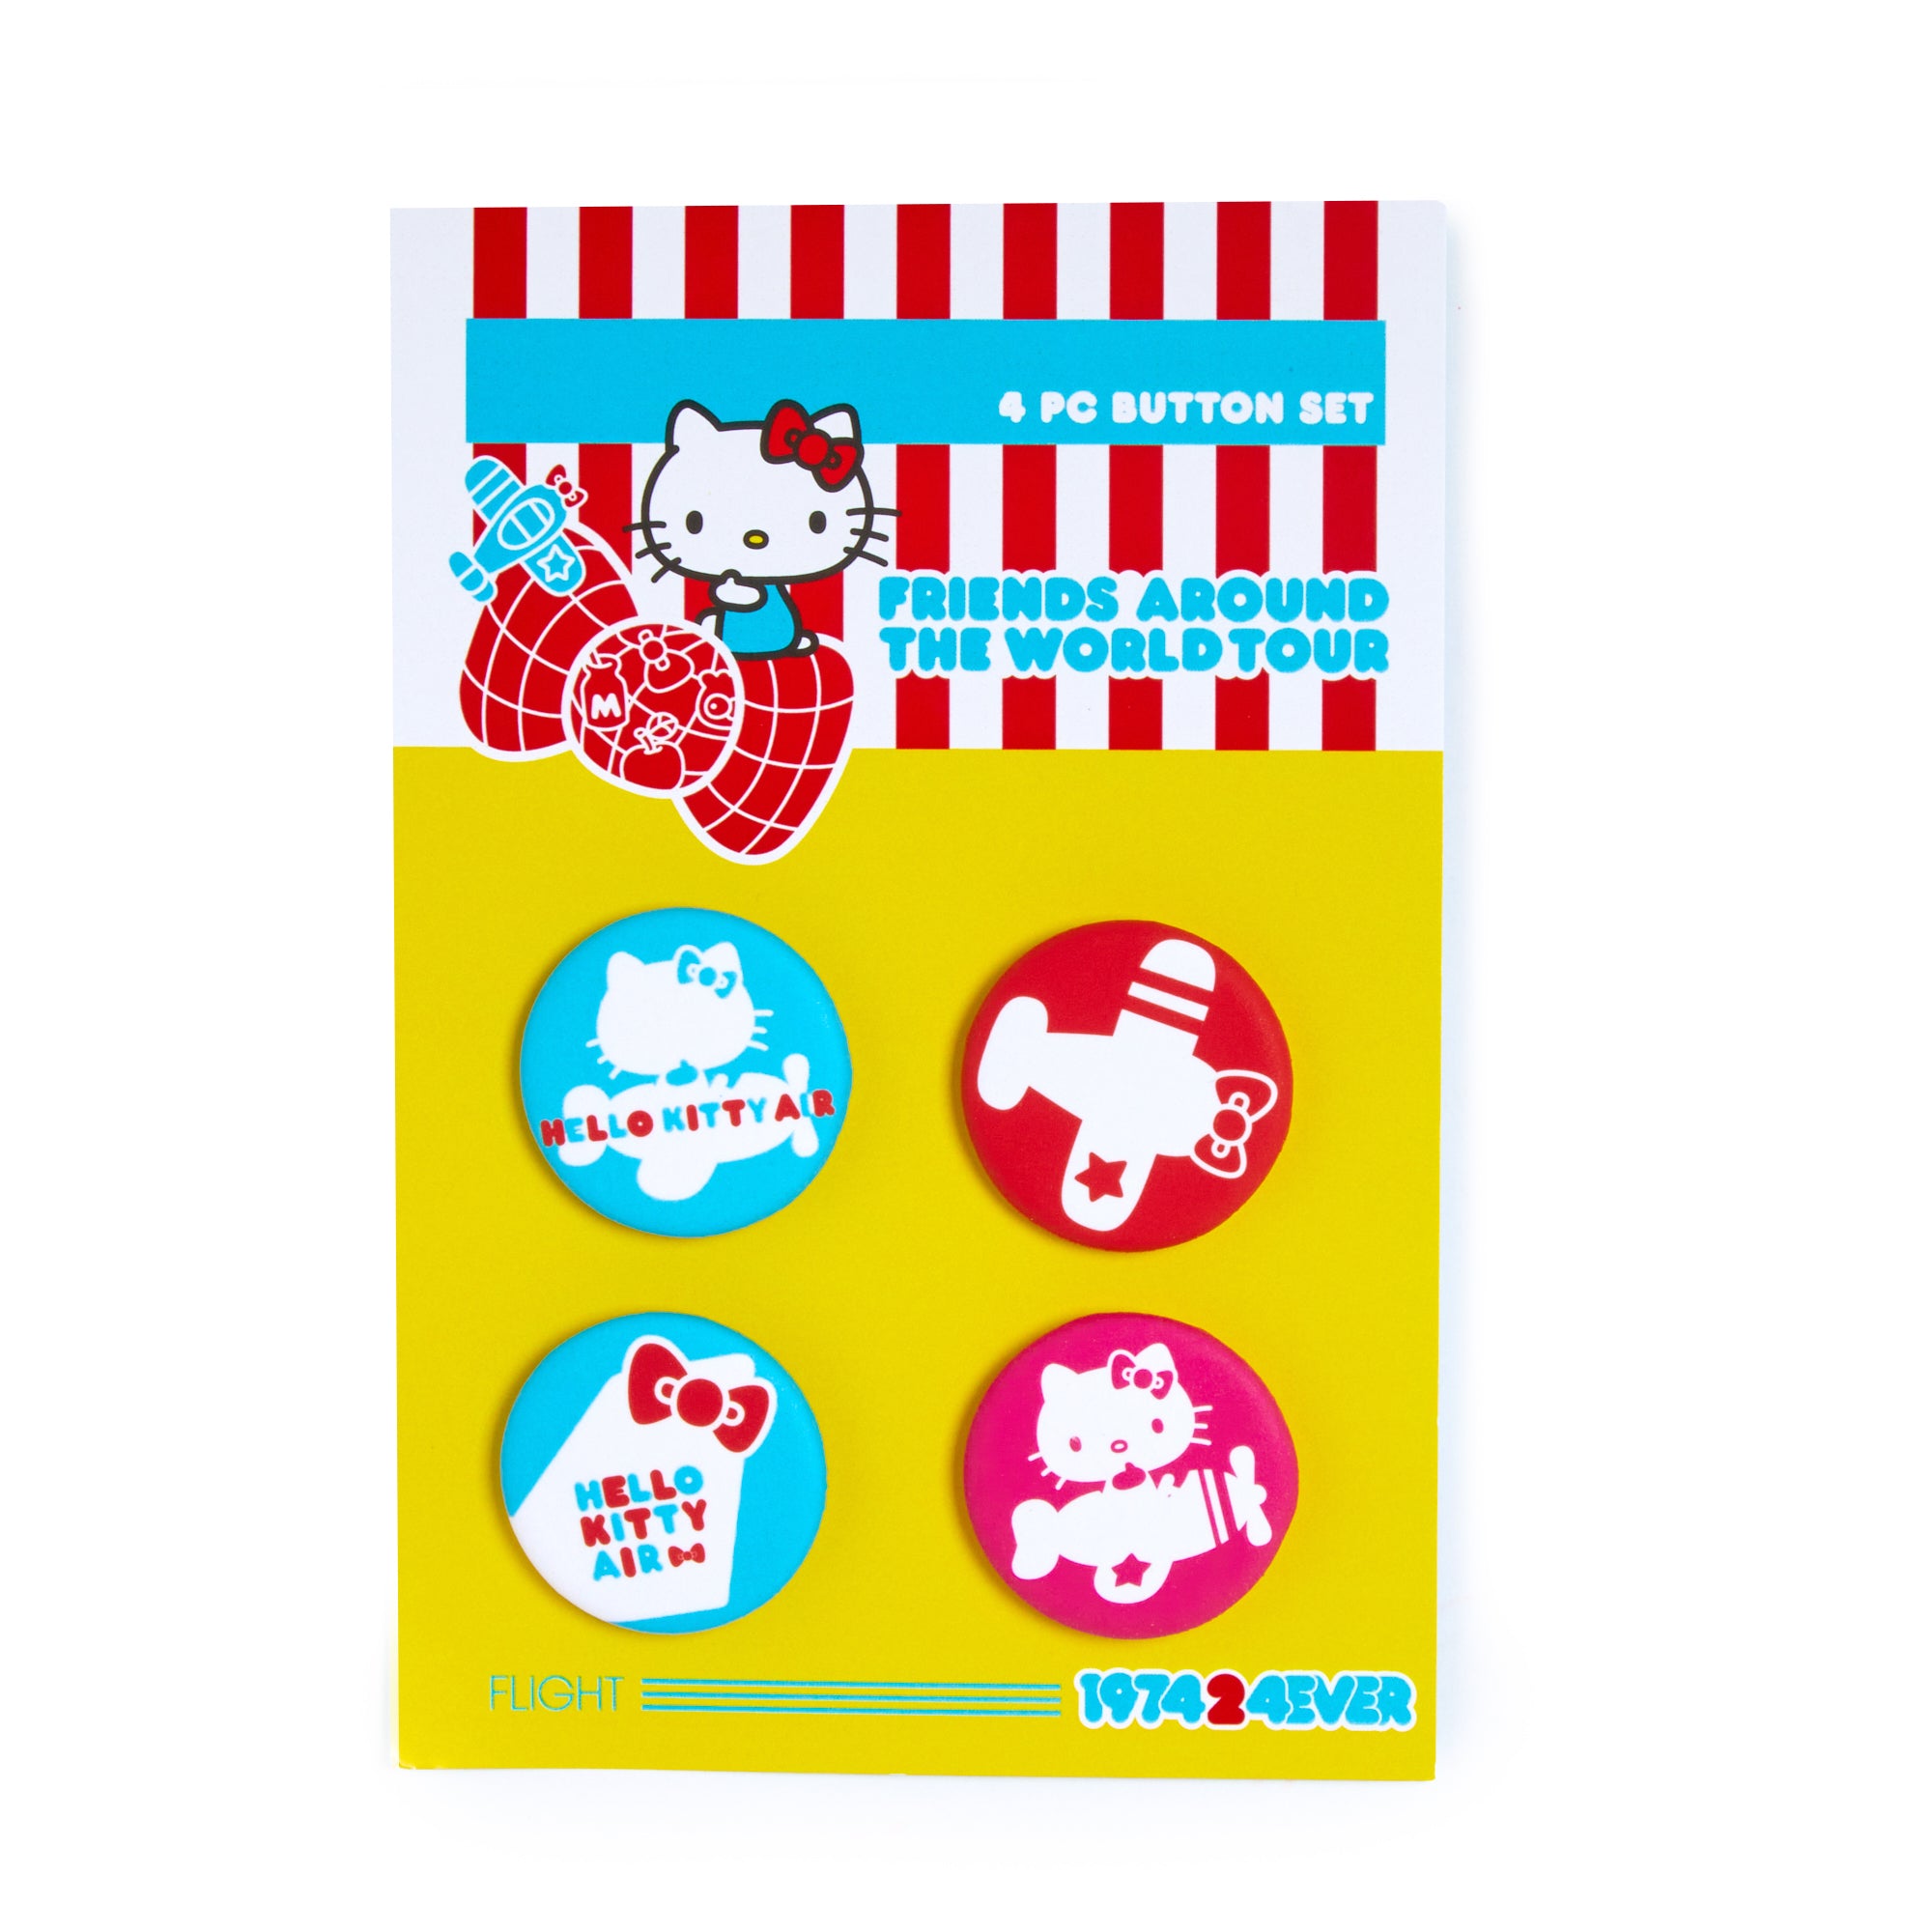 Hello Kitty Friends Around The World Tour Button Set Accessory JACK NADEL   